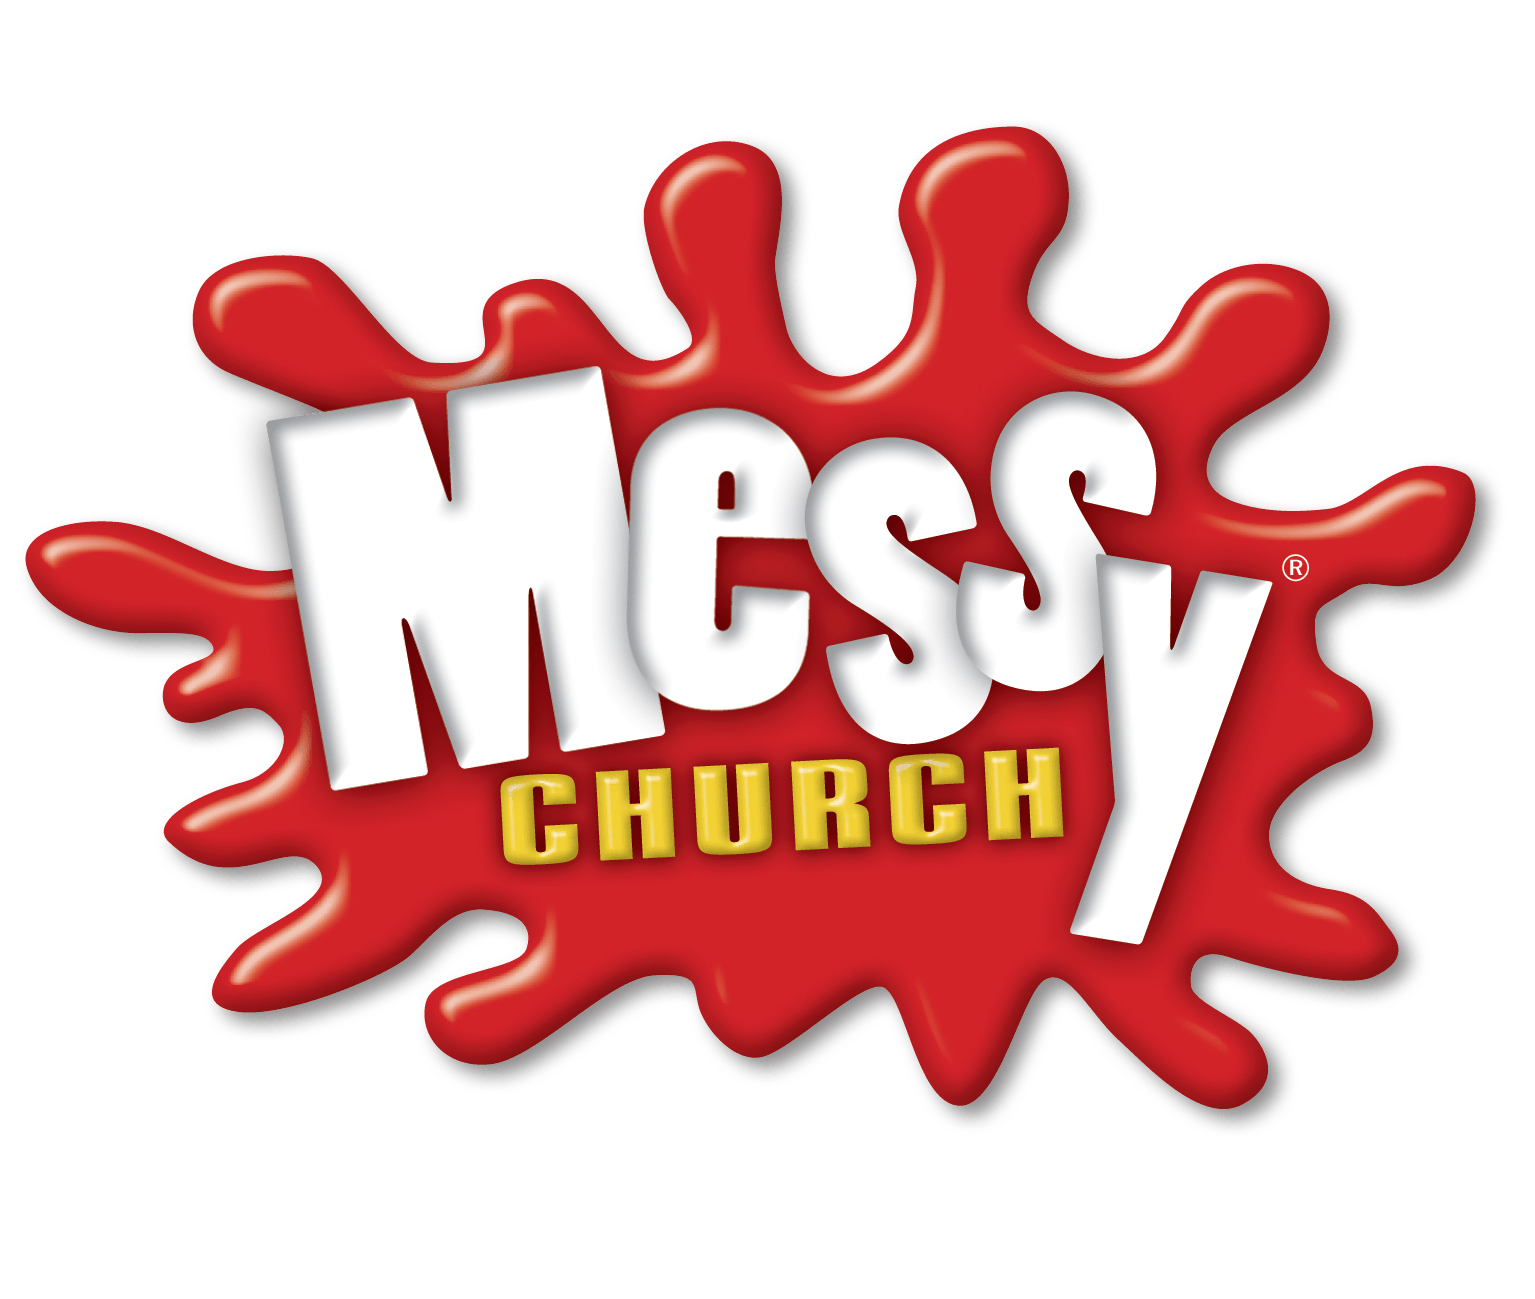 Red and Grey Church Logo - official-messy-church-logo-transparent-background-with-dropshadow ...